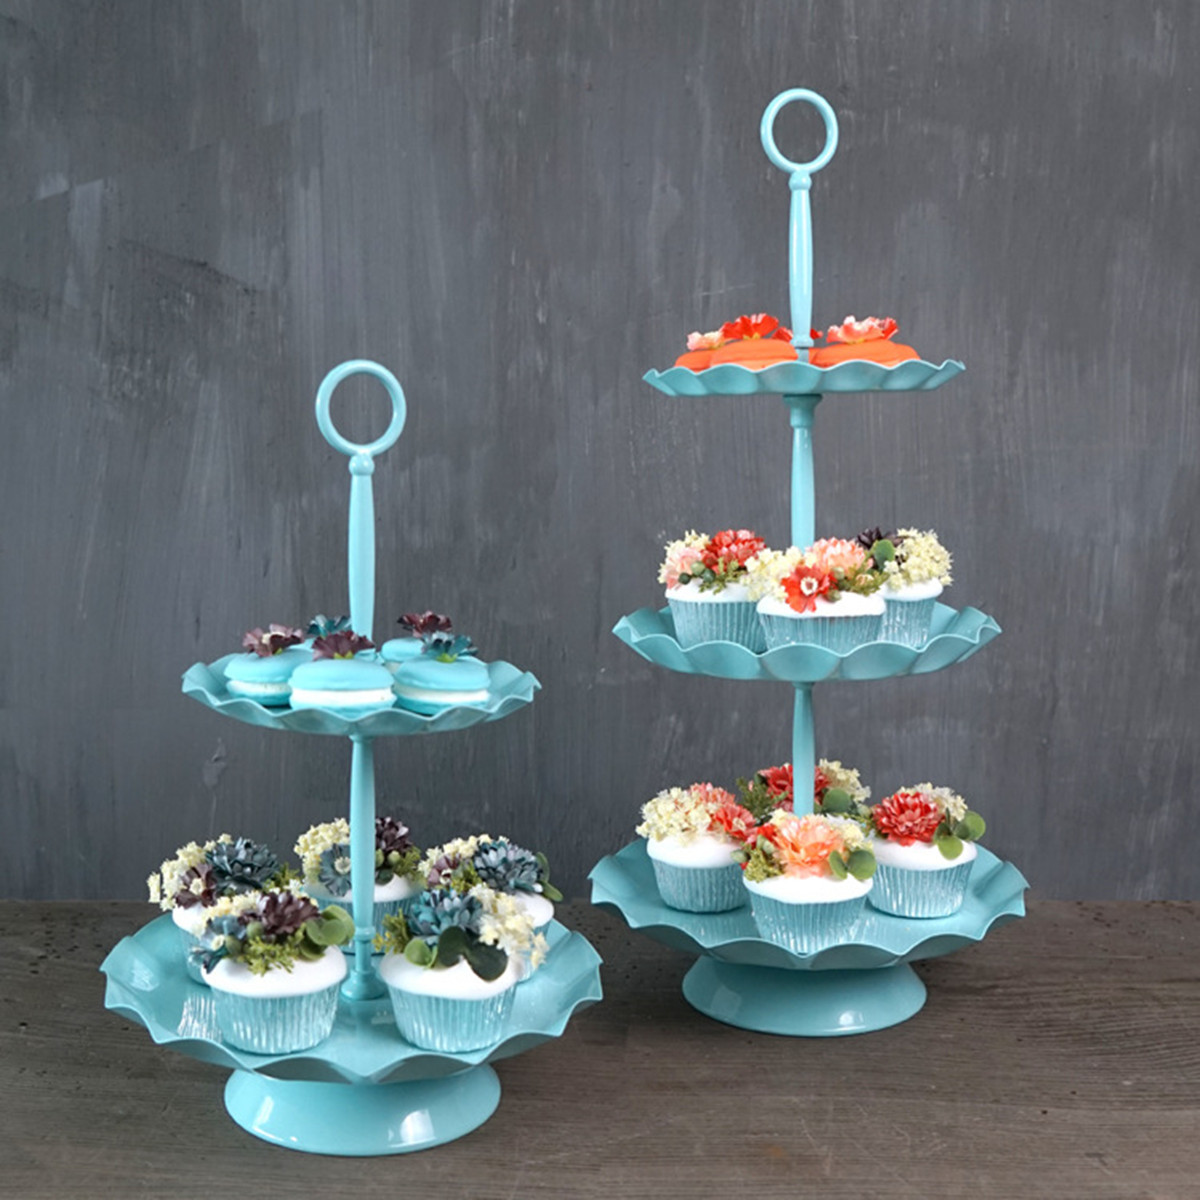 2--3-Ters-Blue-Cake-Holder-Cupcake-Stand-Birthday-Wedding-Party-Display-Holder-Decorations-1340743-1